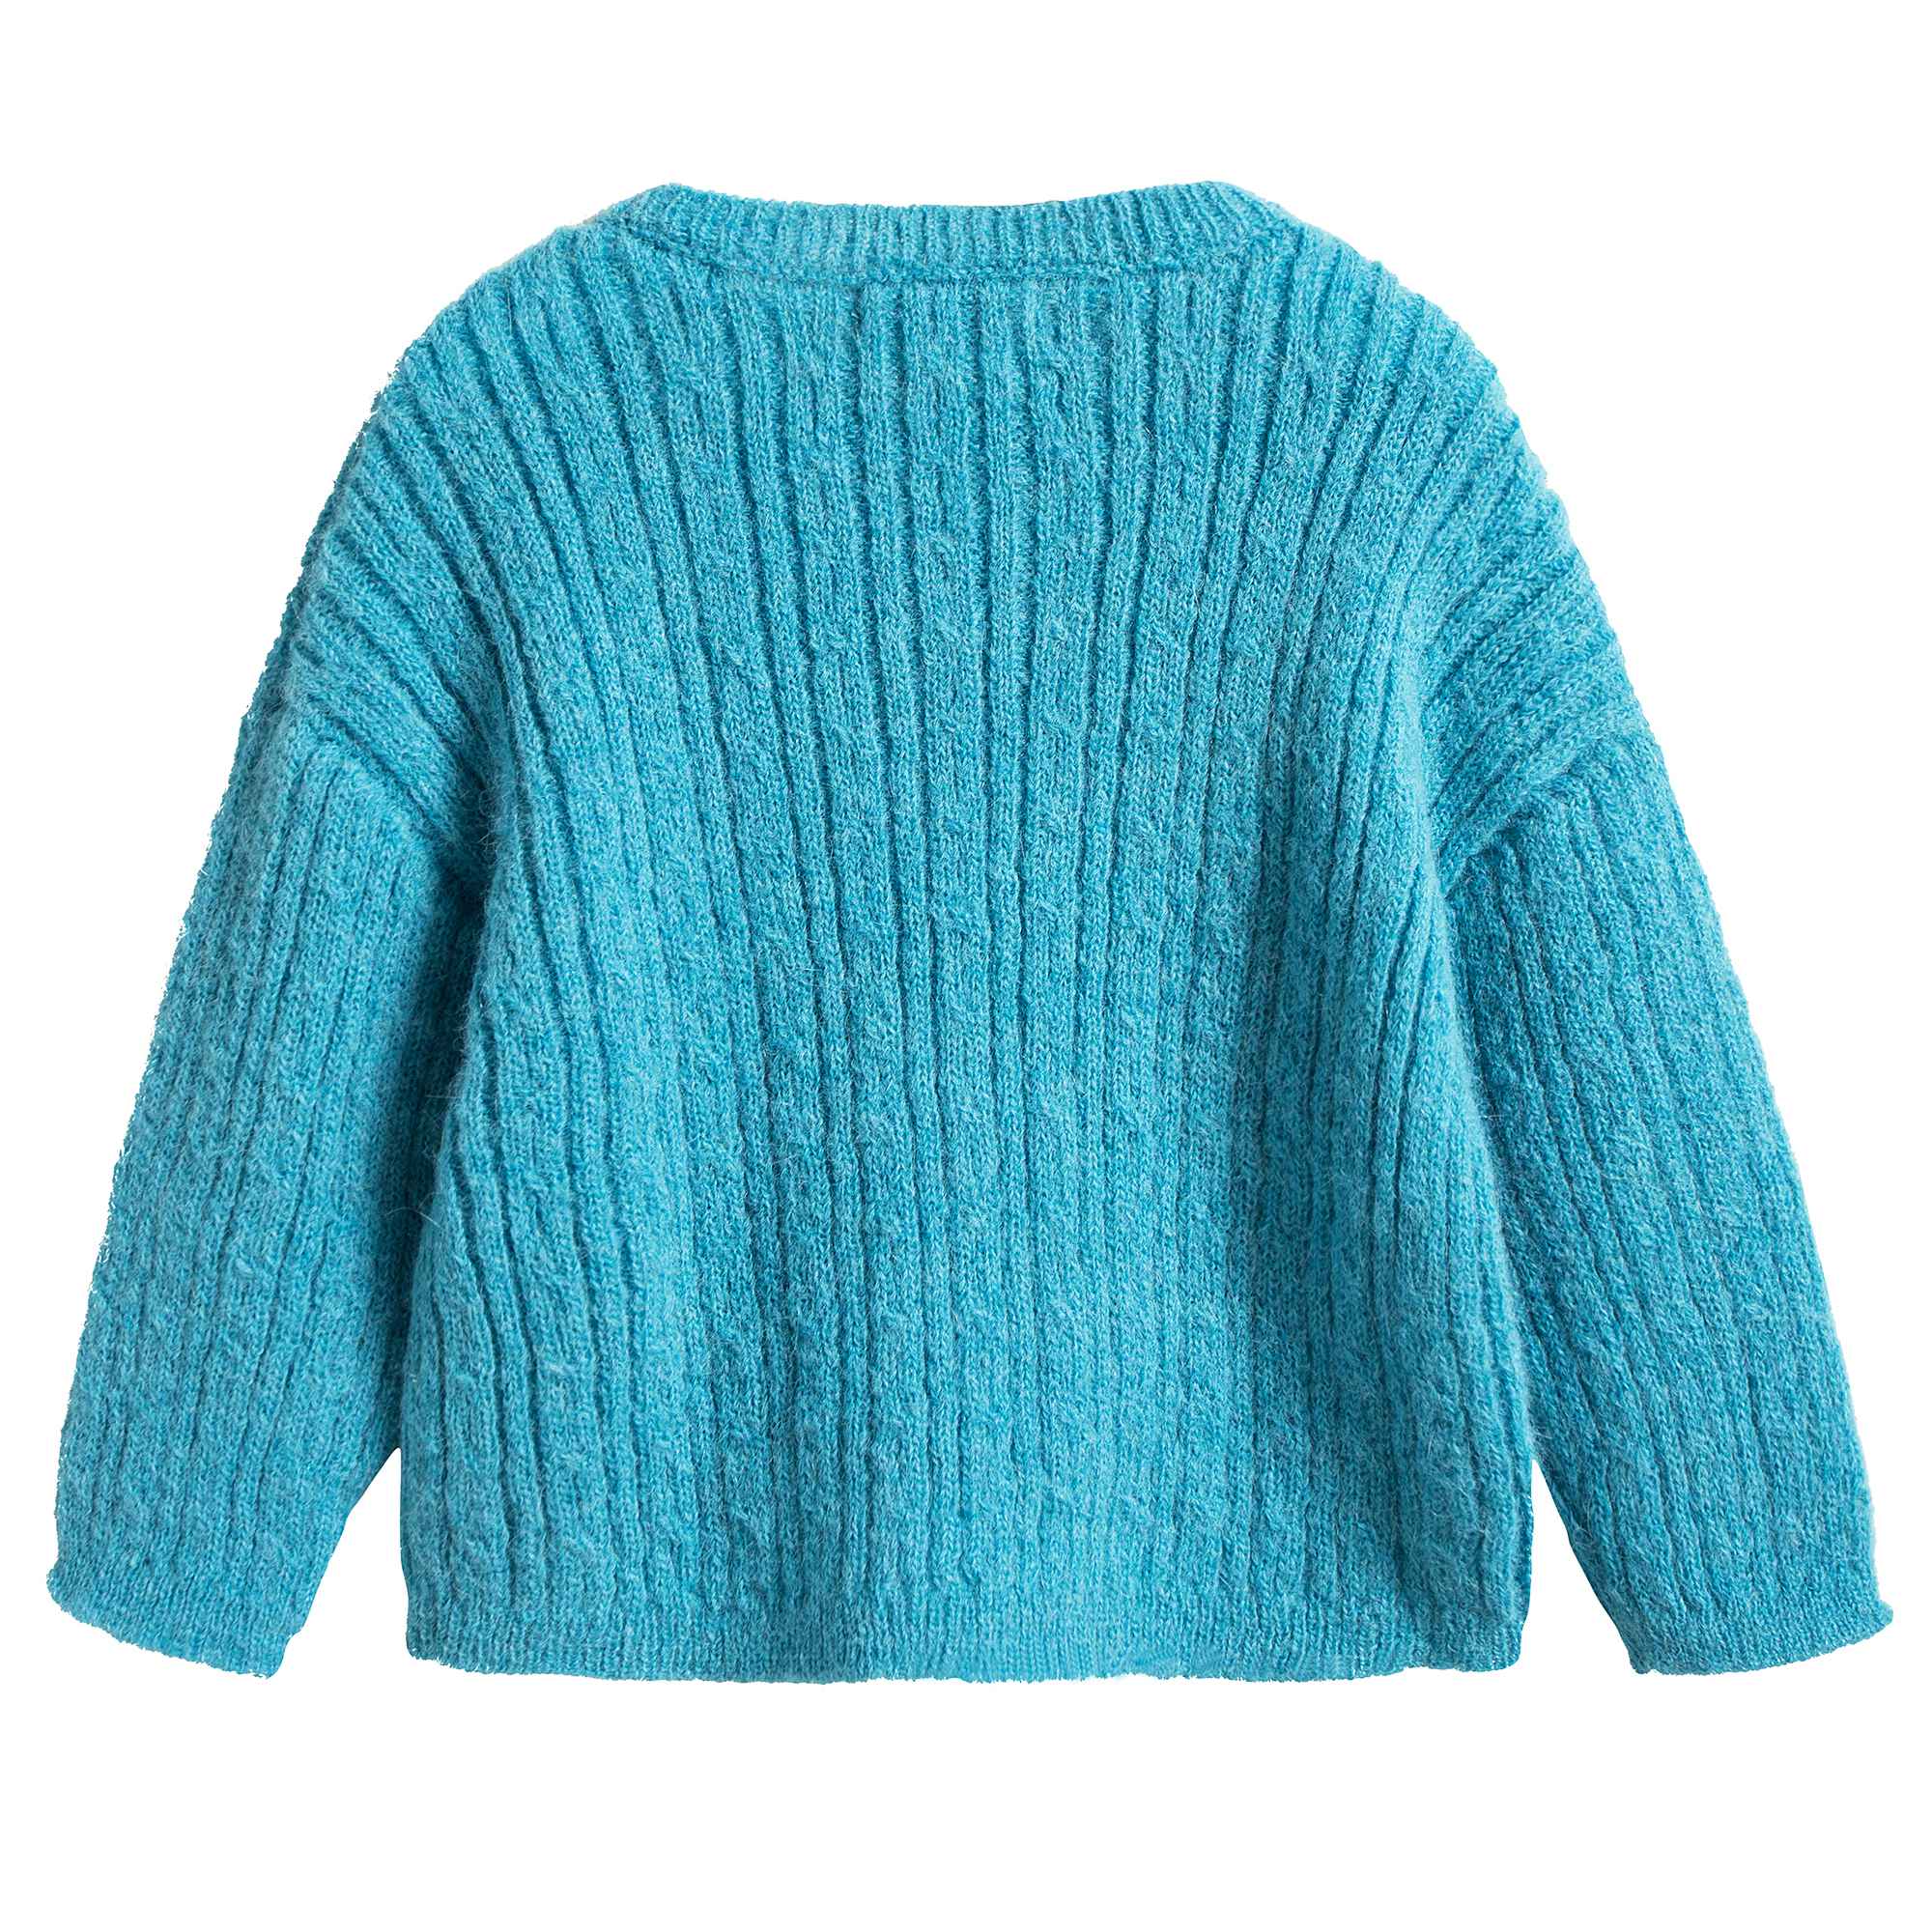 Girls Blue Knitted Sweater